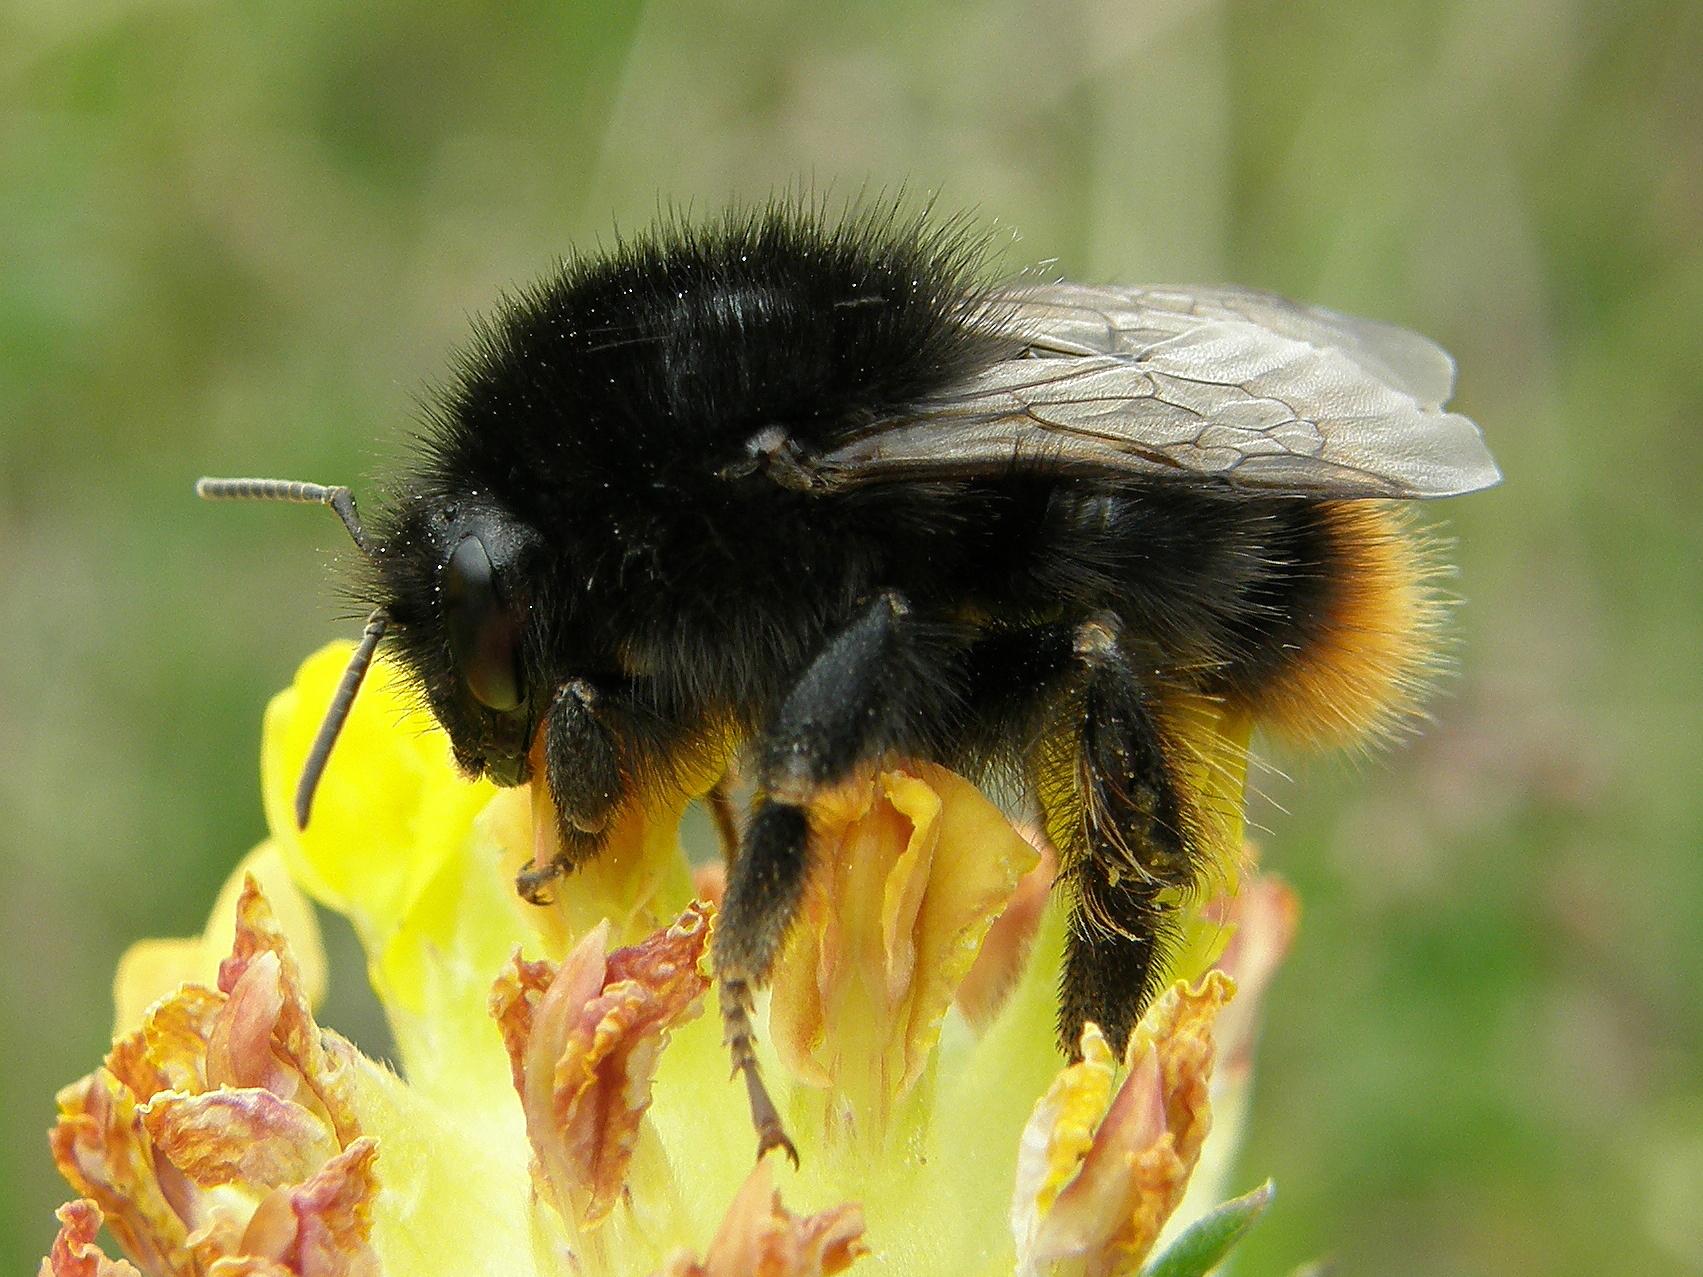 The red-shanked carder bee is one of the many species that has seen significant declines in recent years